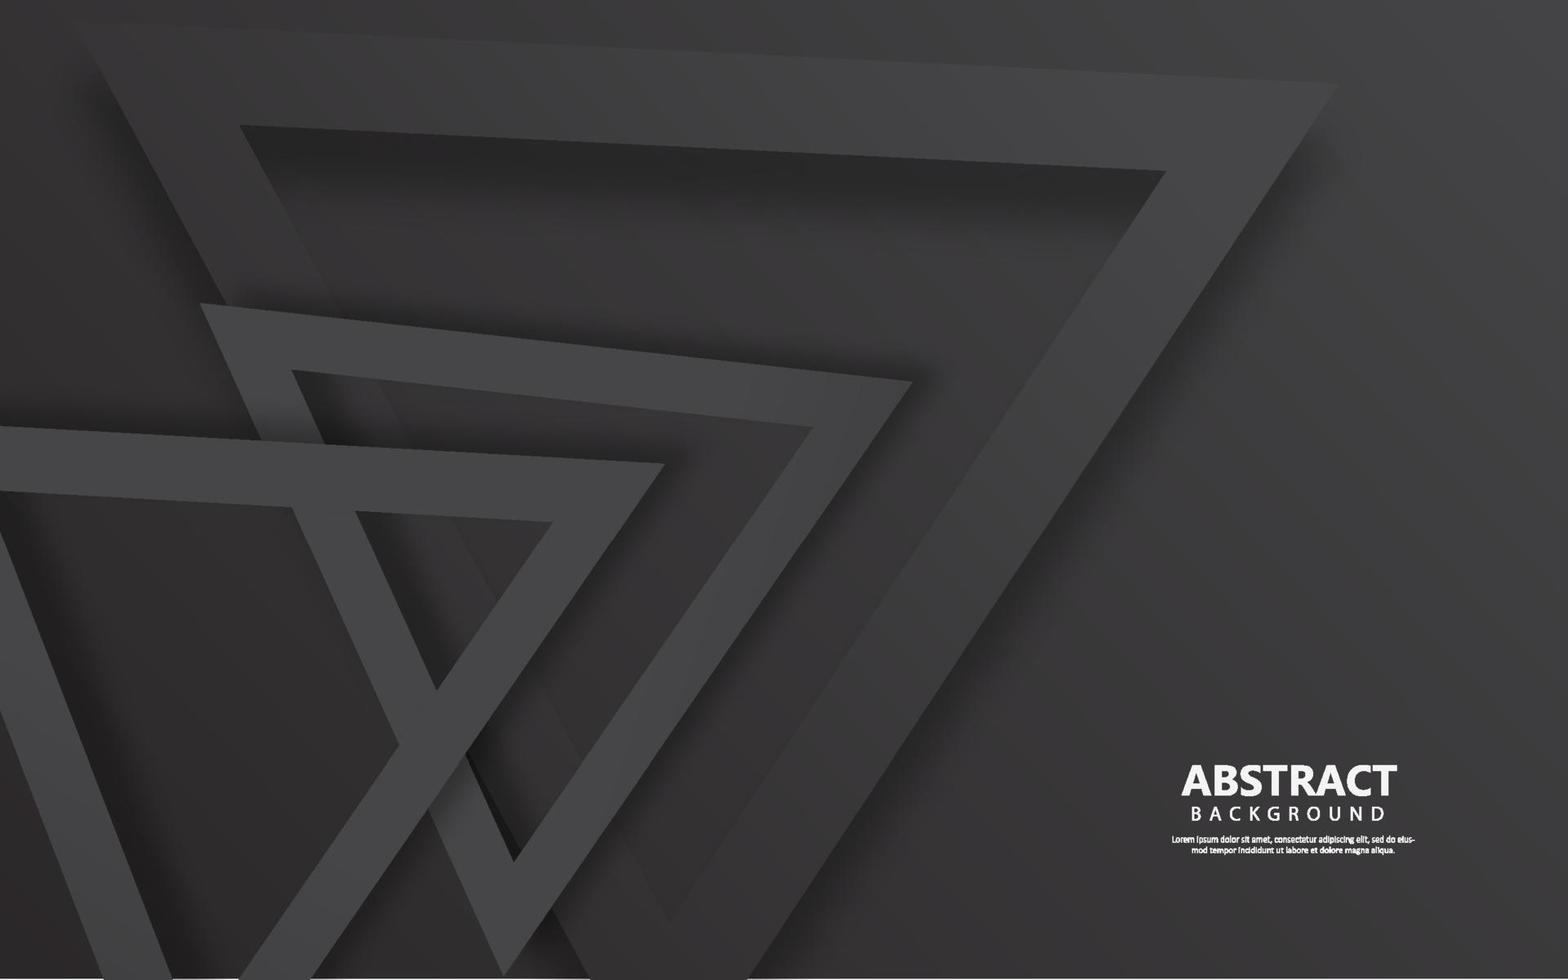 Abstract triangle shape black background vector